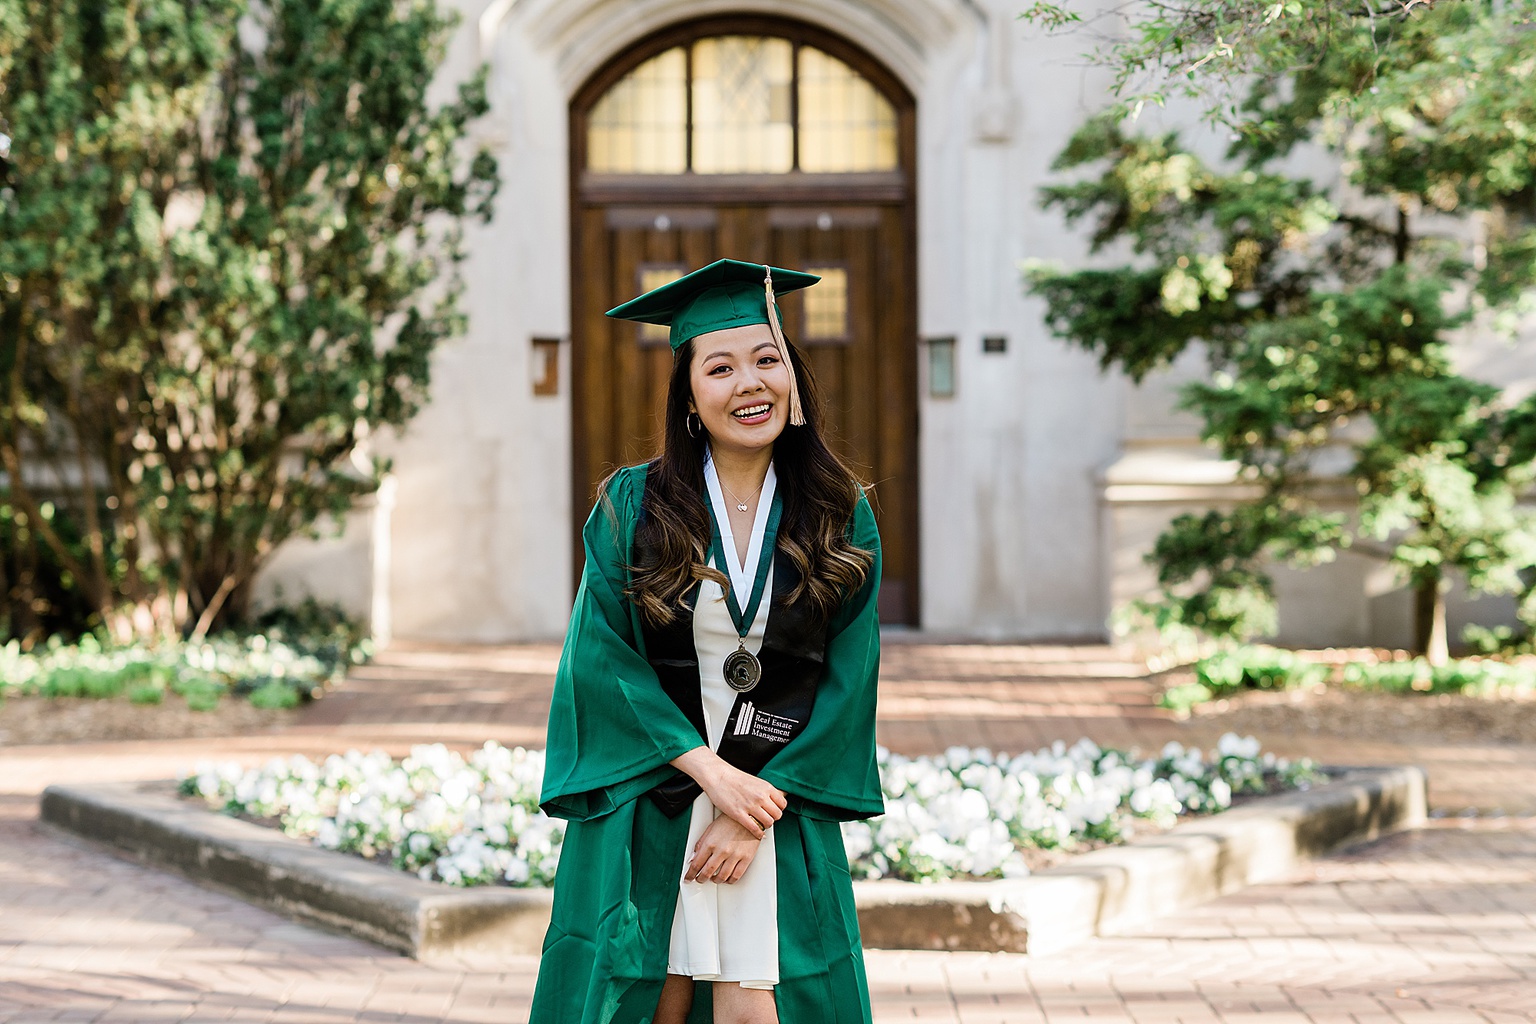 Michigan State Senior grad photoshoot on MSU's campus, photo of a woman in a white dress and cap and gown standing in front of the Beaumont Tower door, by Allie Siarto & Co., East Lansing photographers